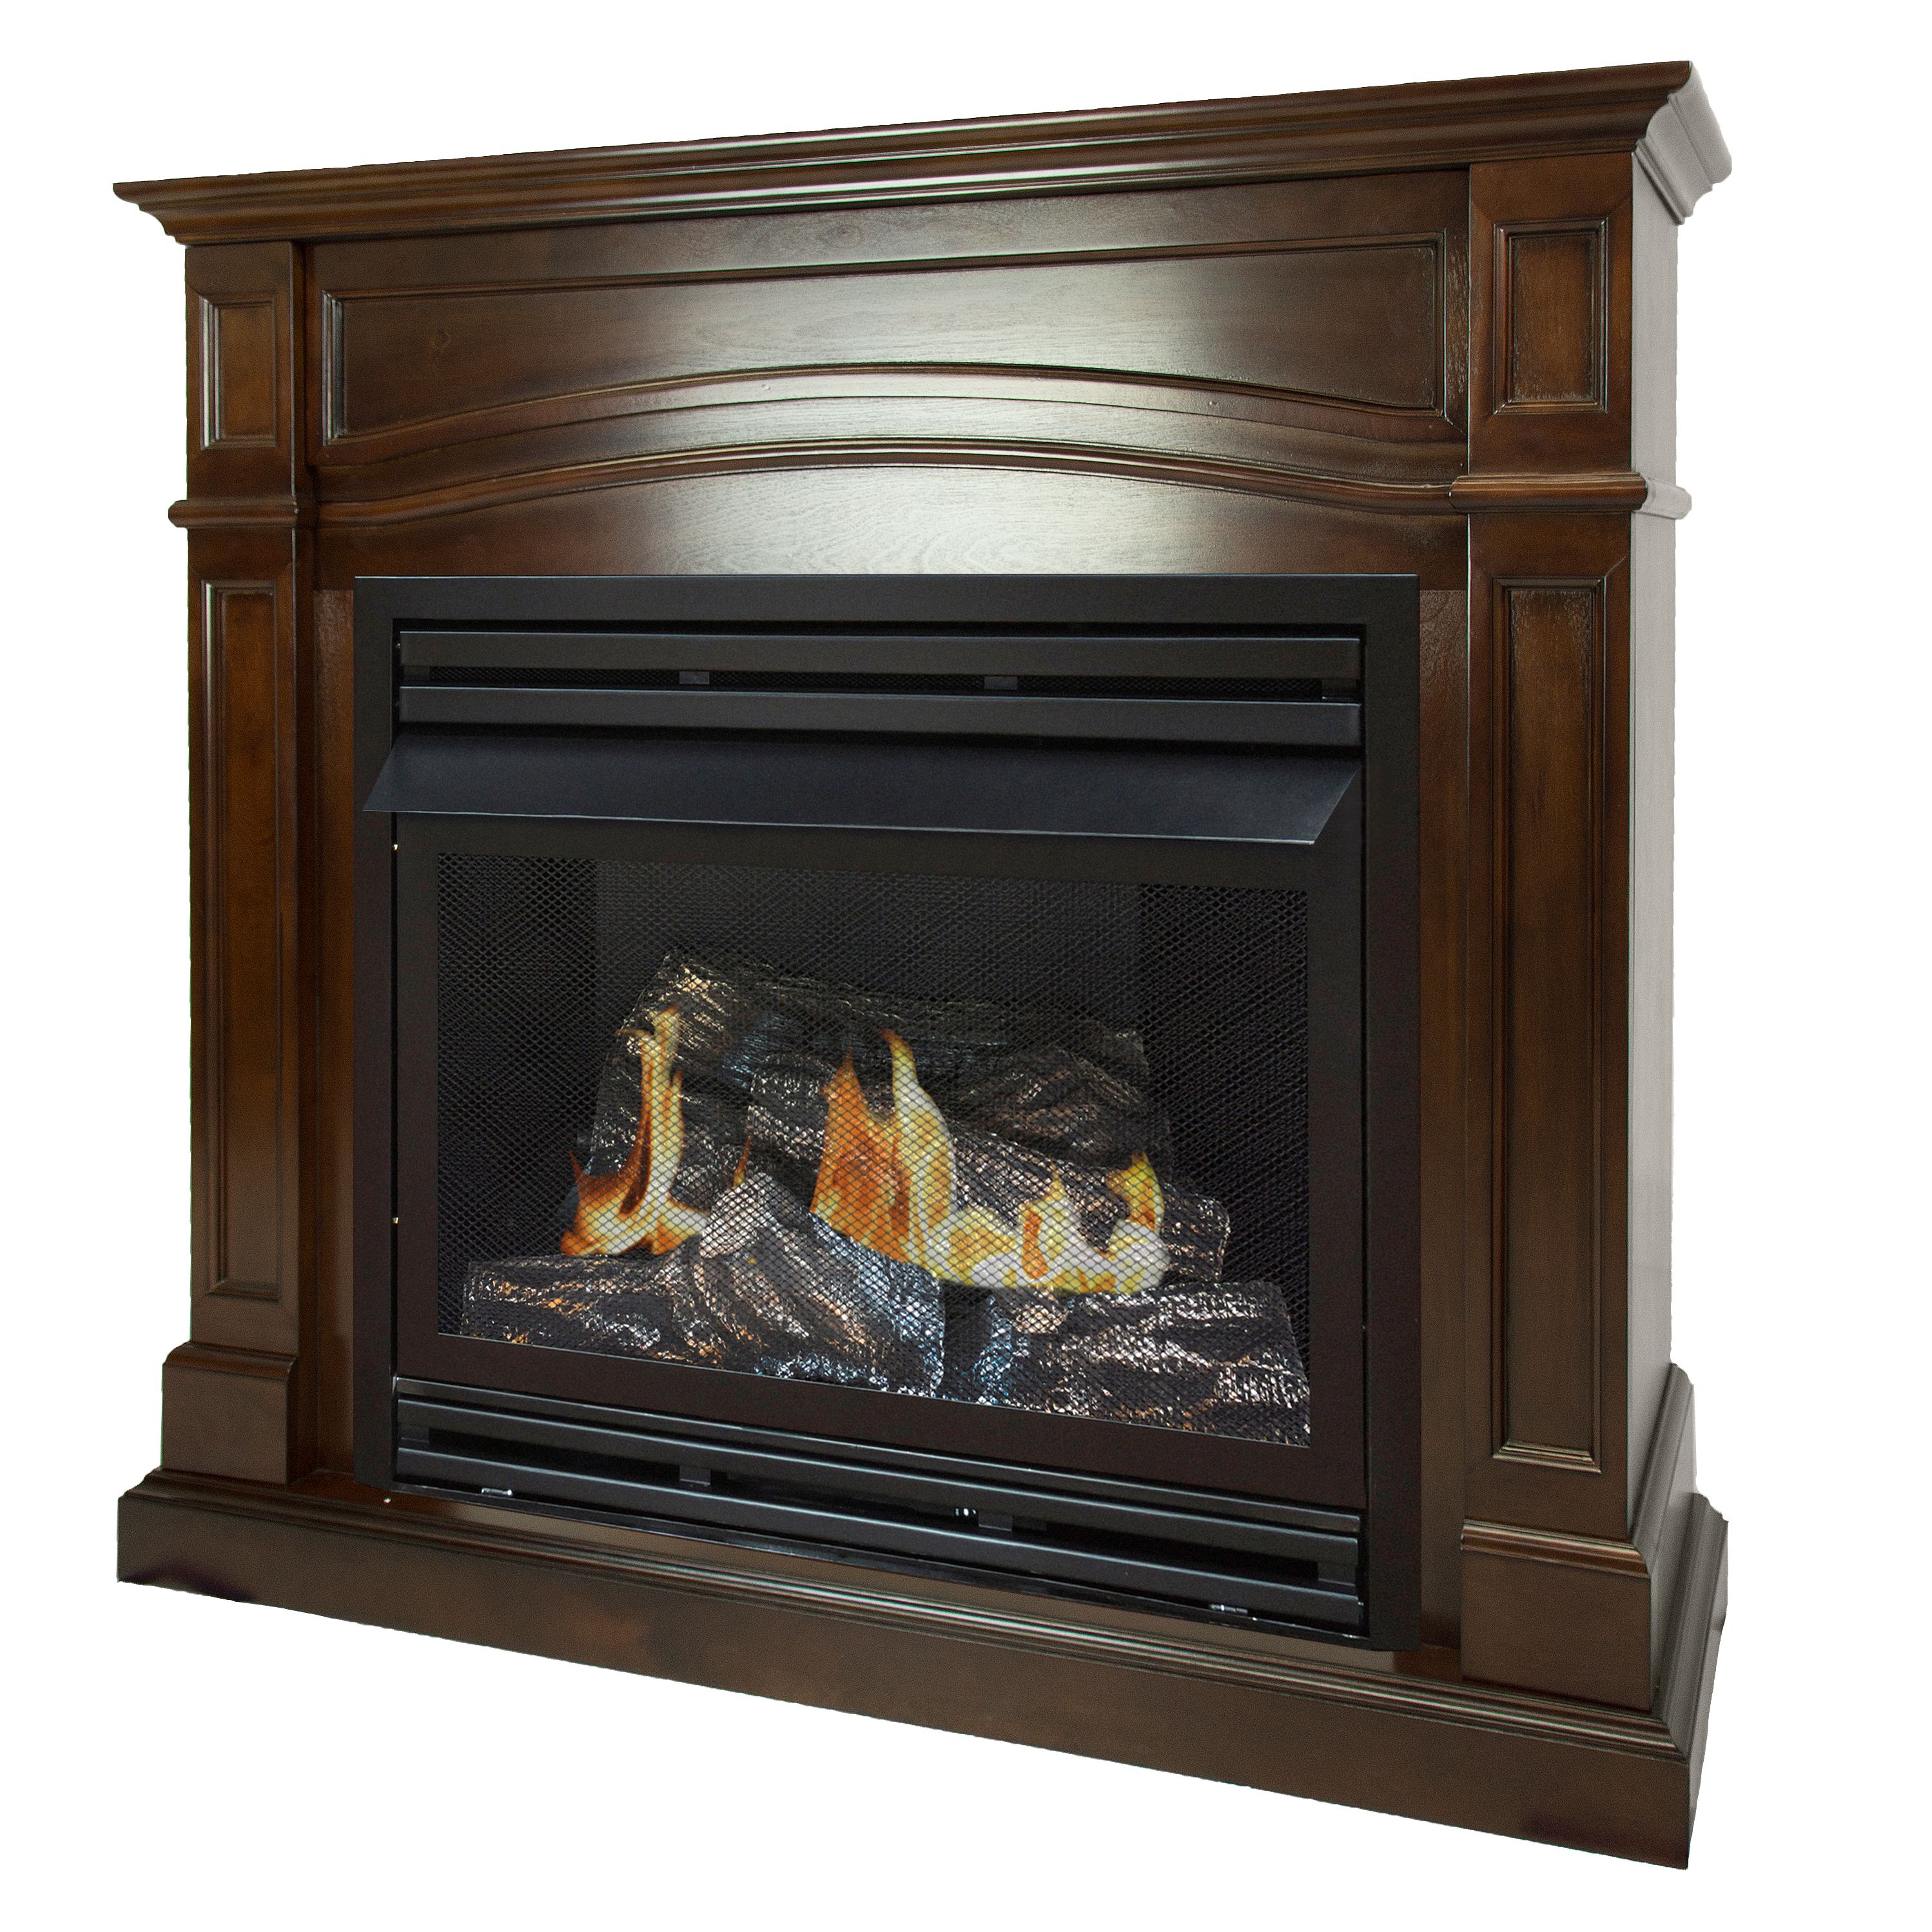 Pleasant Hearth 46 in. Liquid Propane Large Freestanding Cherry Vent Free Fireplace 32,000 BTU - image 1 of 8